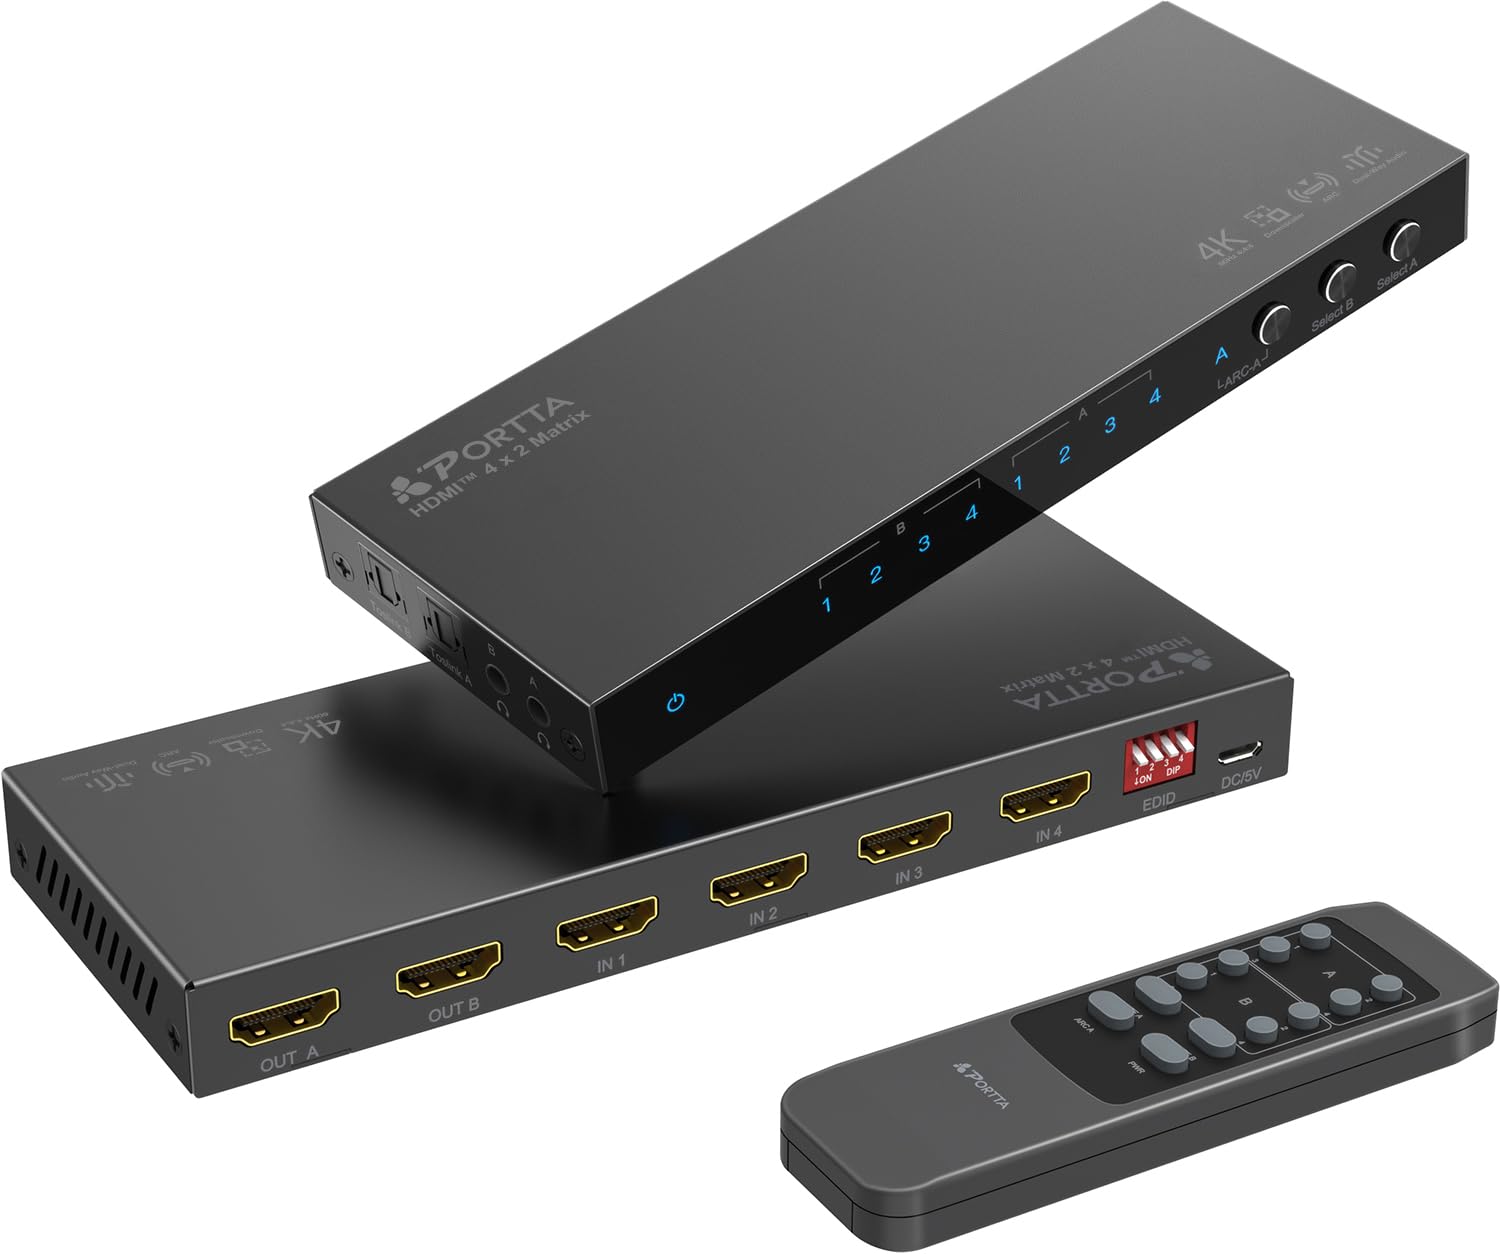 4K 60Hz HDMI Matrix 4x2, PORTTA 4 in 2 Out Switch Splitter with Toslink 3.5mm Audio Extractor, ARC, 16 EDID Modes, 4K Downscale, and IR Remote Support HDMI 2.0b HDCP 2.3/2.2 HDR 3D CEC